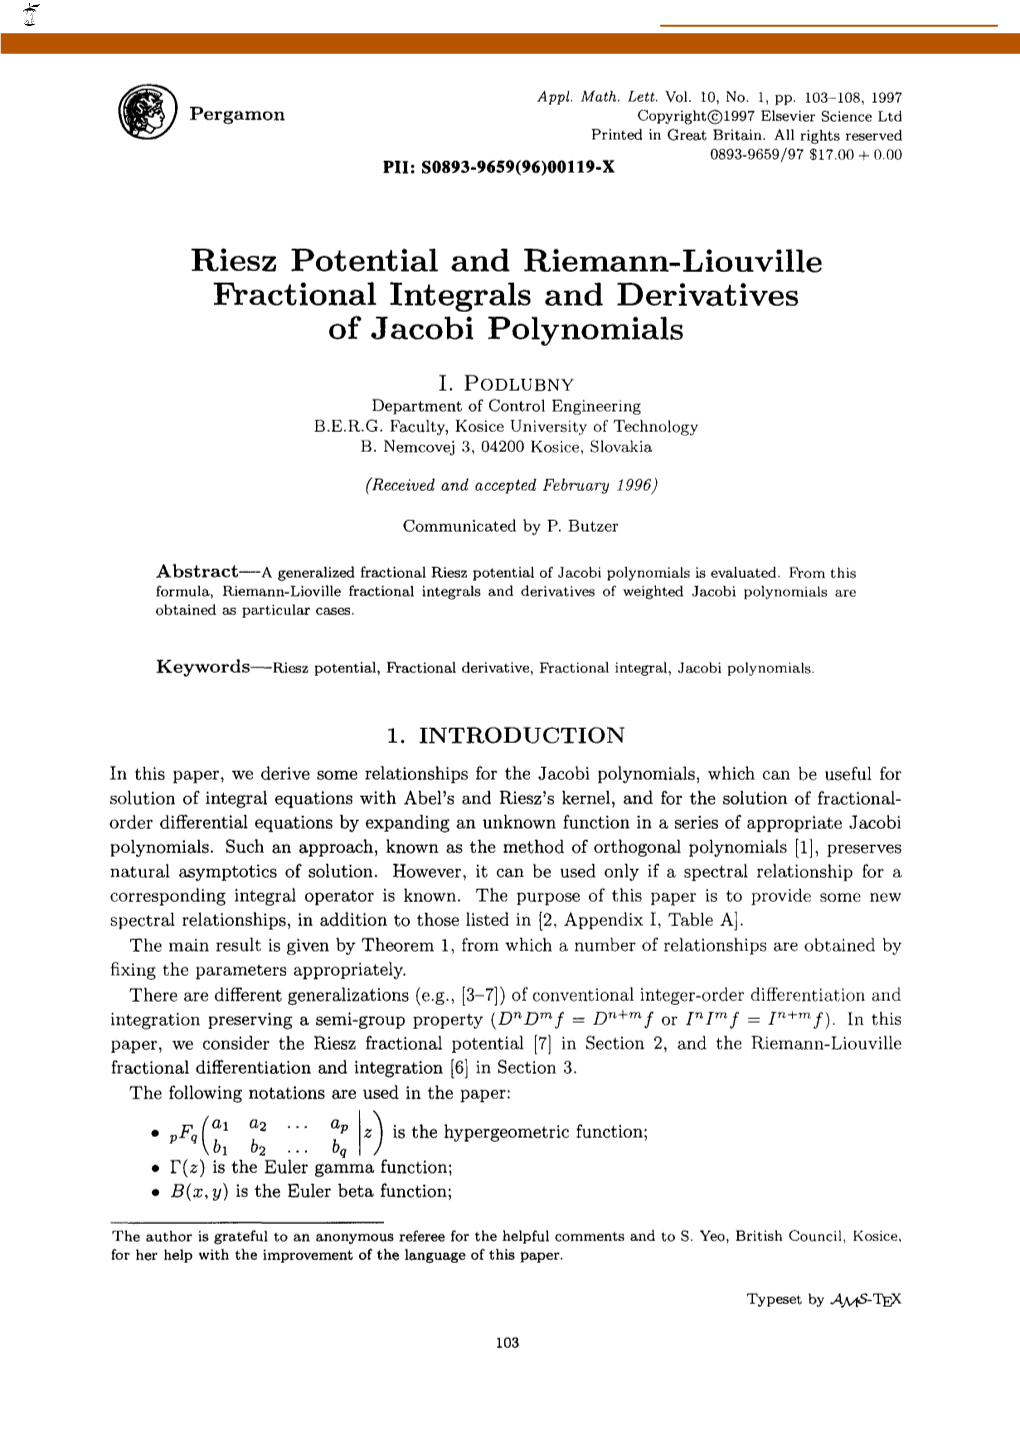 Riesz Potential and Riemann-Liouville Fractional Integrals and Derivatives of Jacobi Polynomials